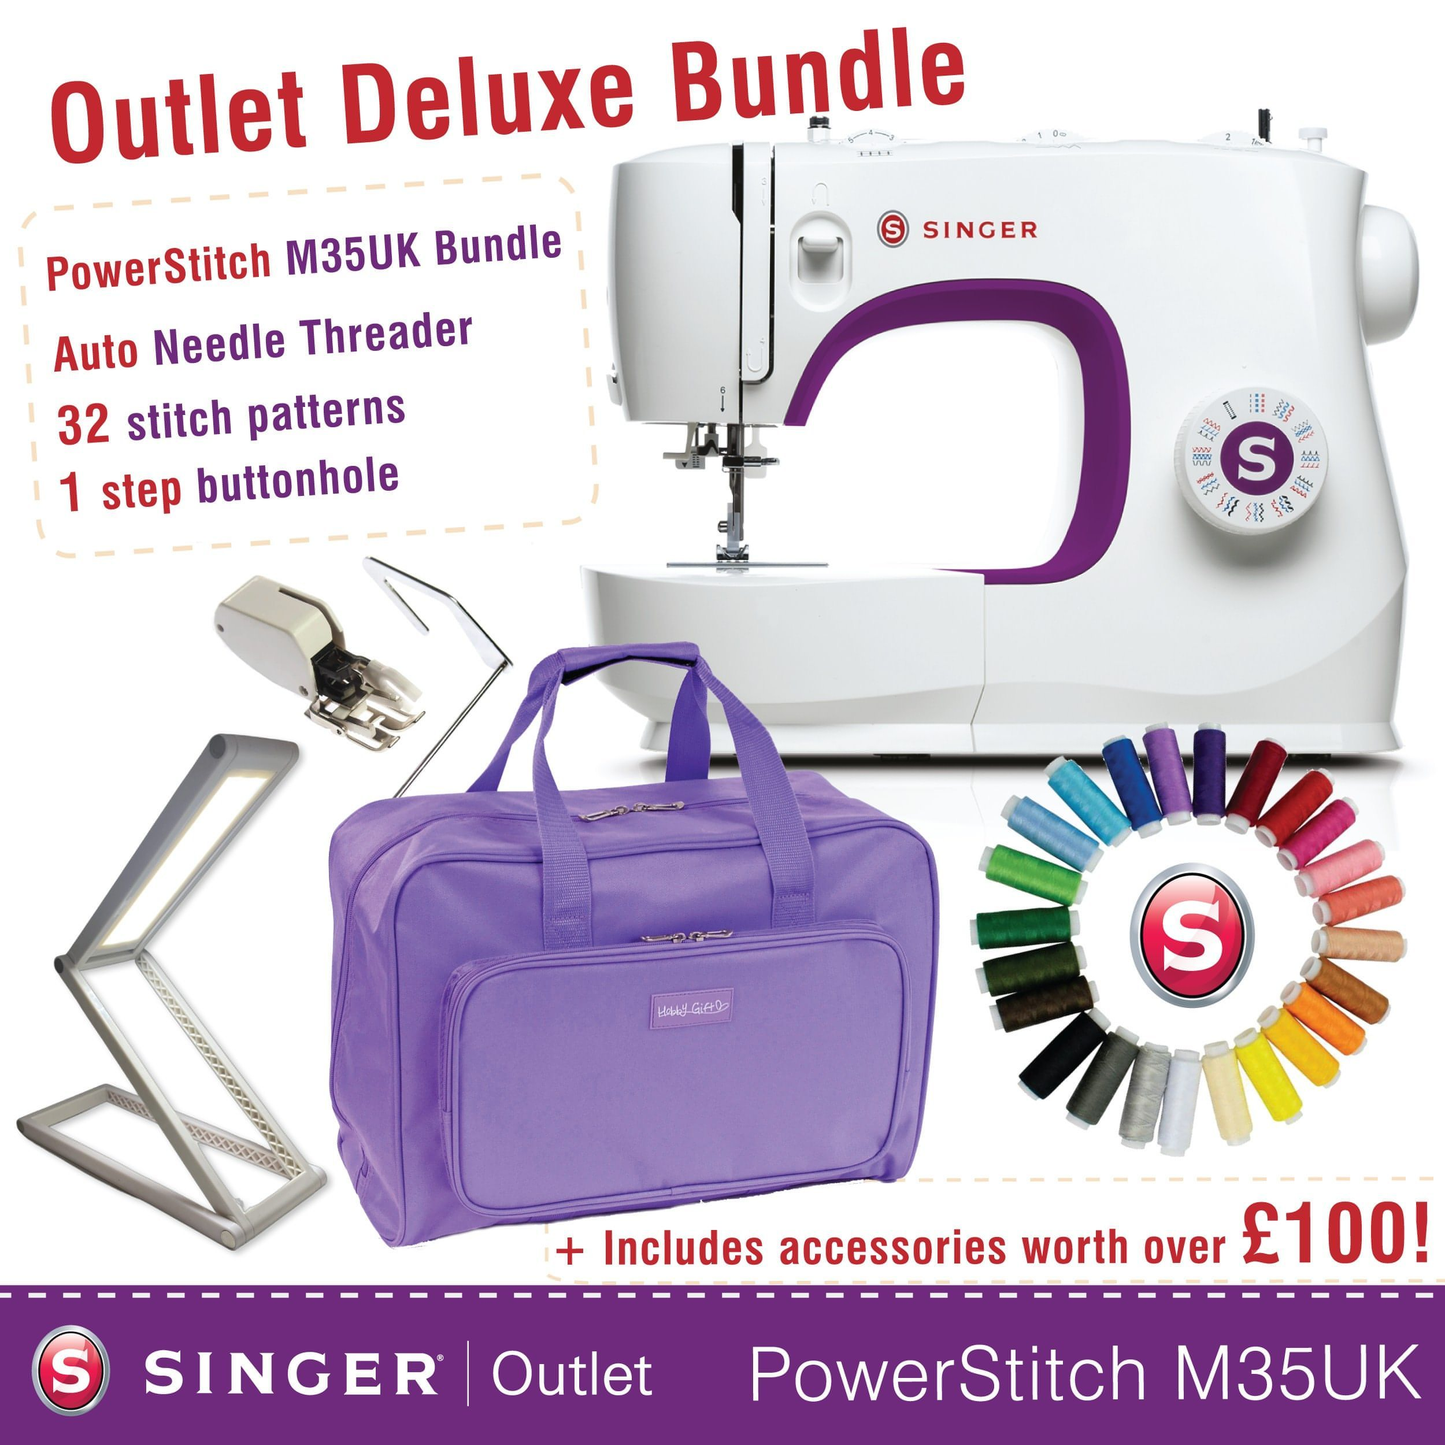 Deluxe Bundle with Singer M35 Luxury Sewing Machine Bag, 24 x thread set, LED lamp, Walking Foot for heavy fabrics * save over £100 *